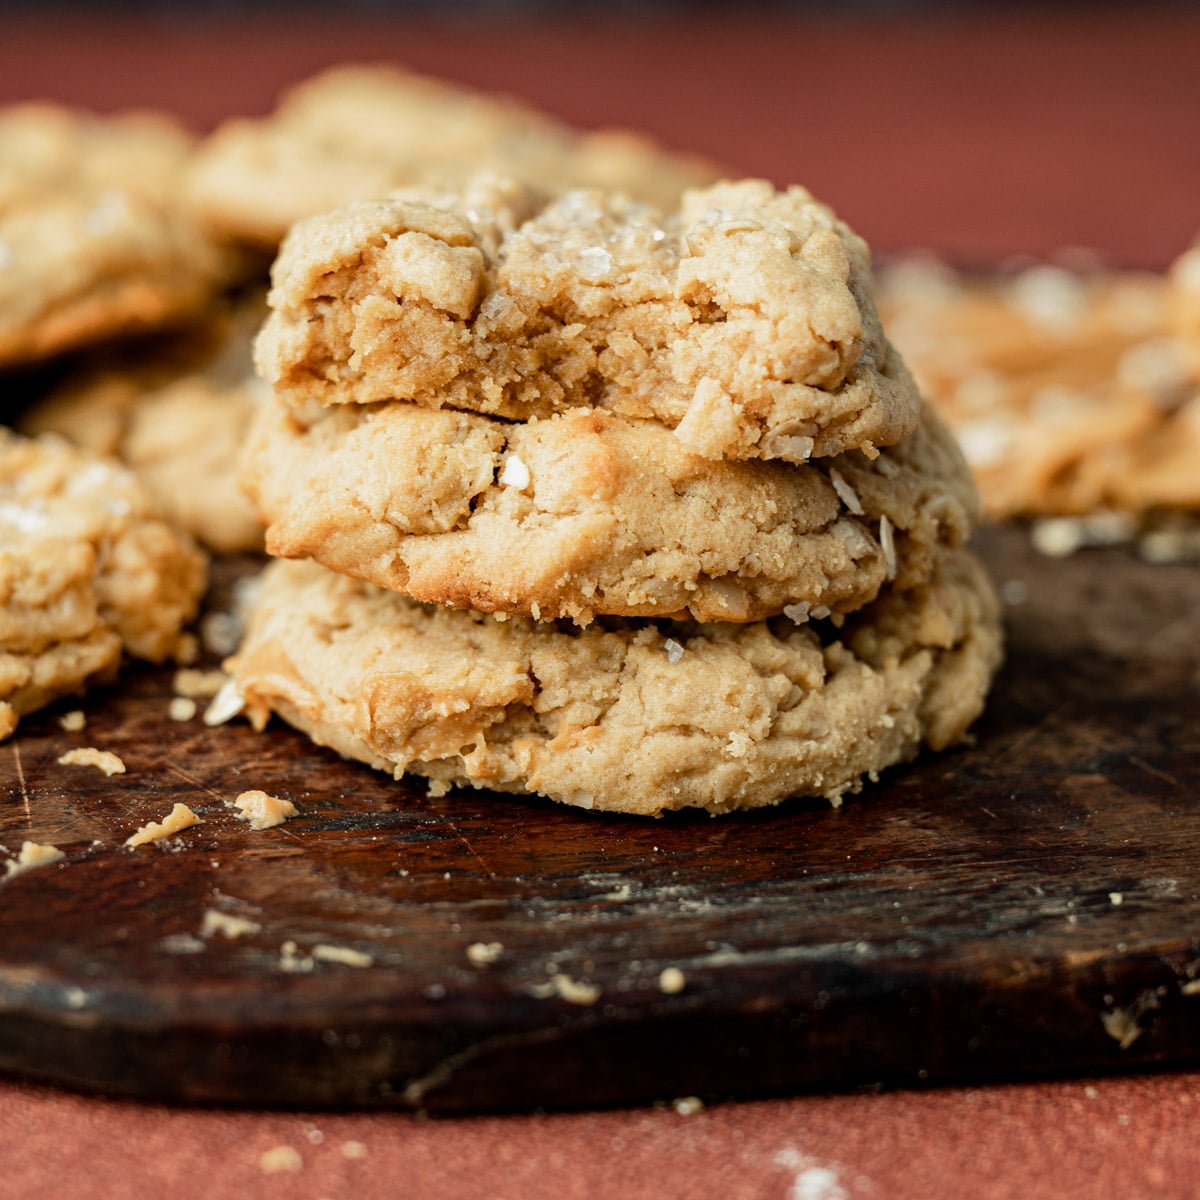 a stack of 3 peanut butter oatmeal cookies, one with a bite out